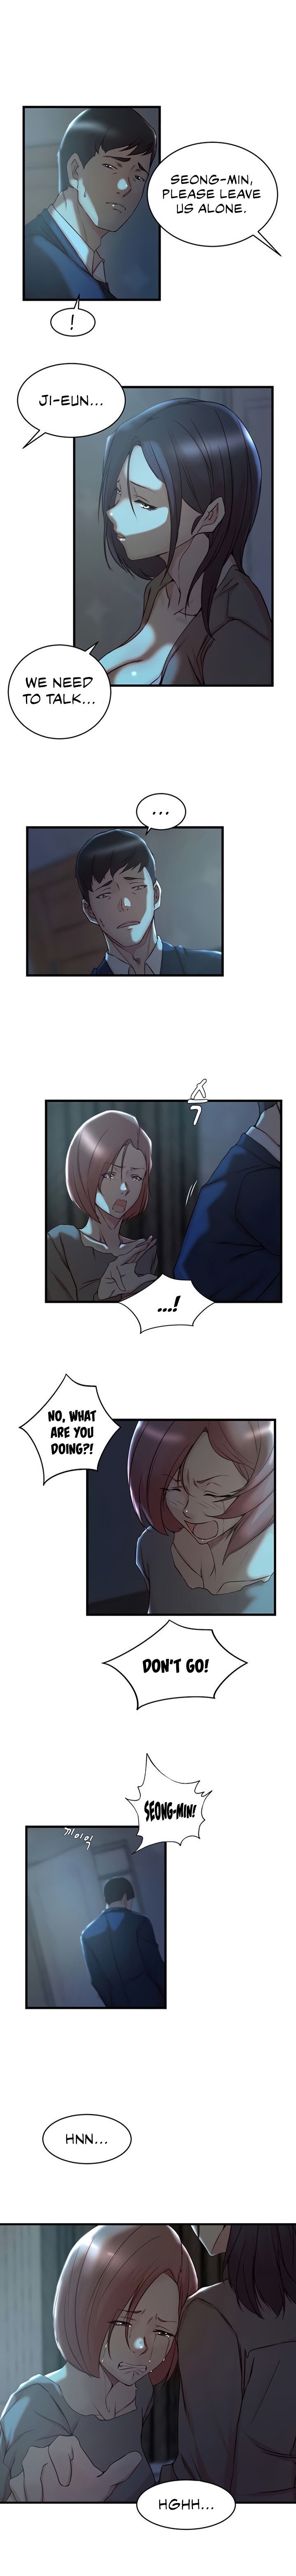 Sister-in-Law Manhwa - Chapter 38 Page 6